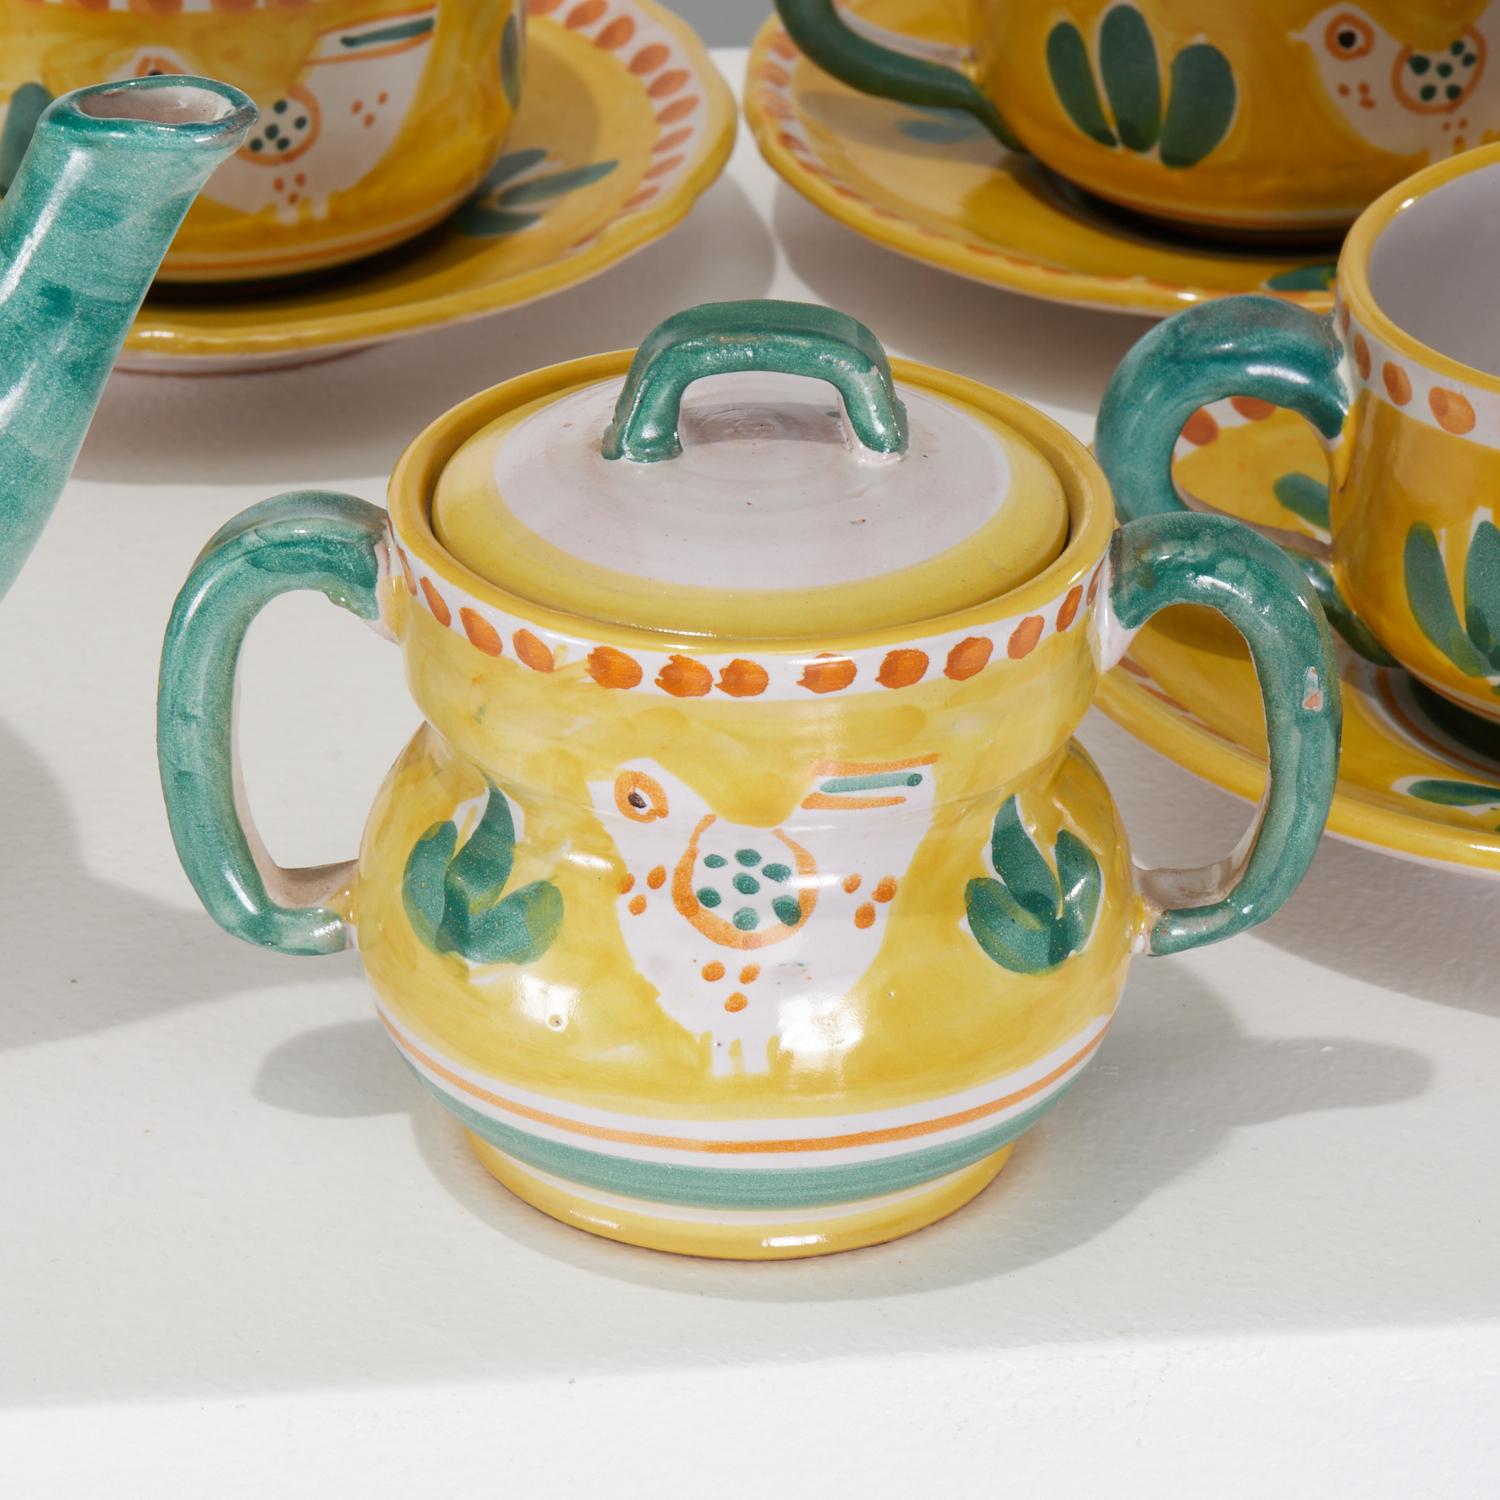 Country Solimene Vietri, 'Decoro Campagna' Hand Painted Italian Pottery Tea Set for 16 For Sale